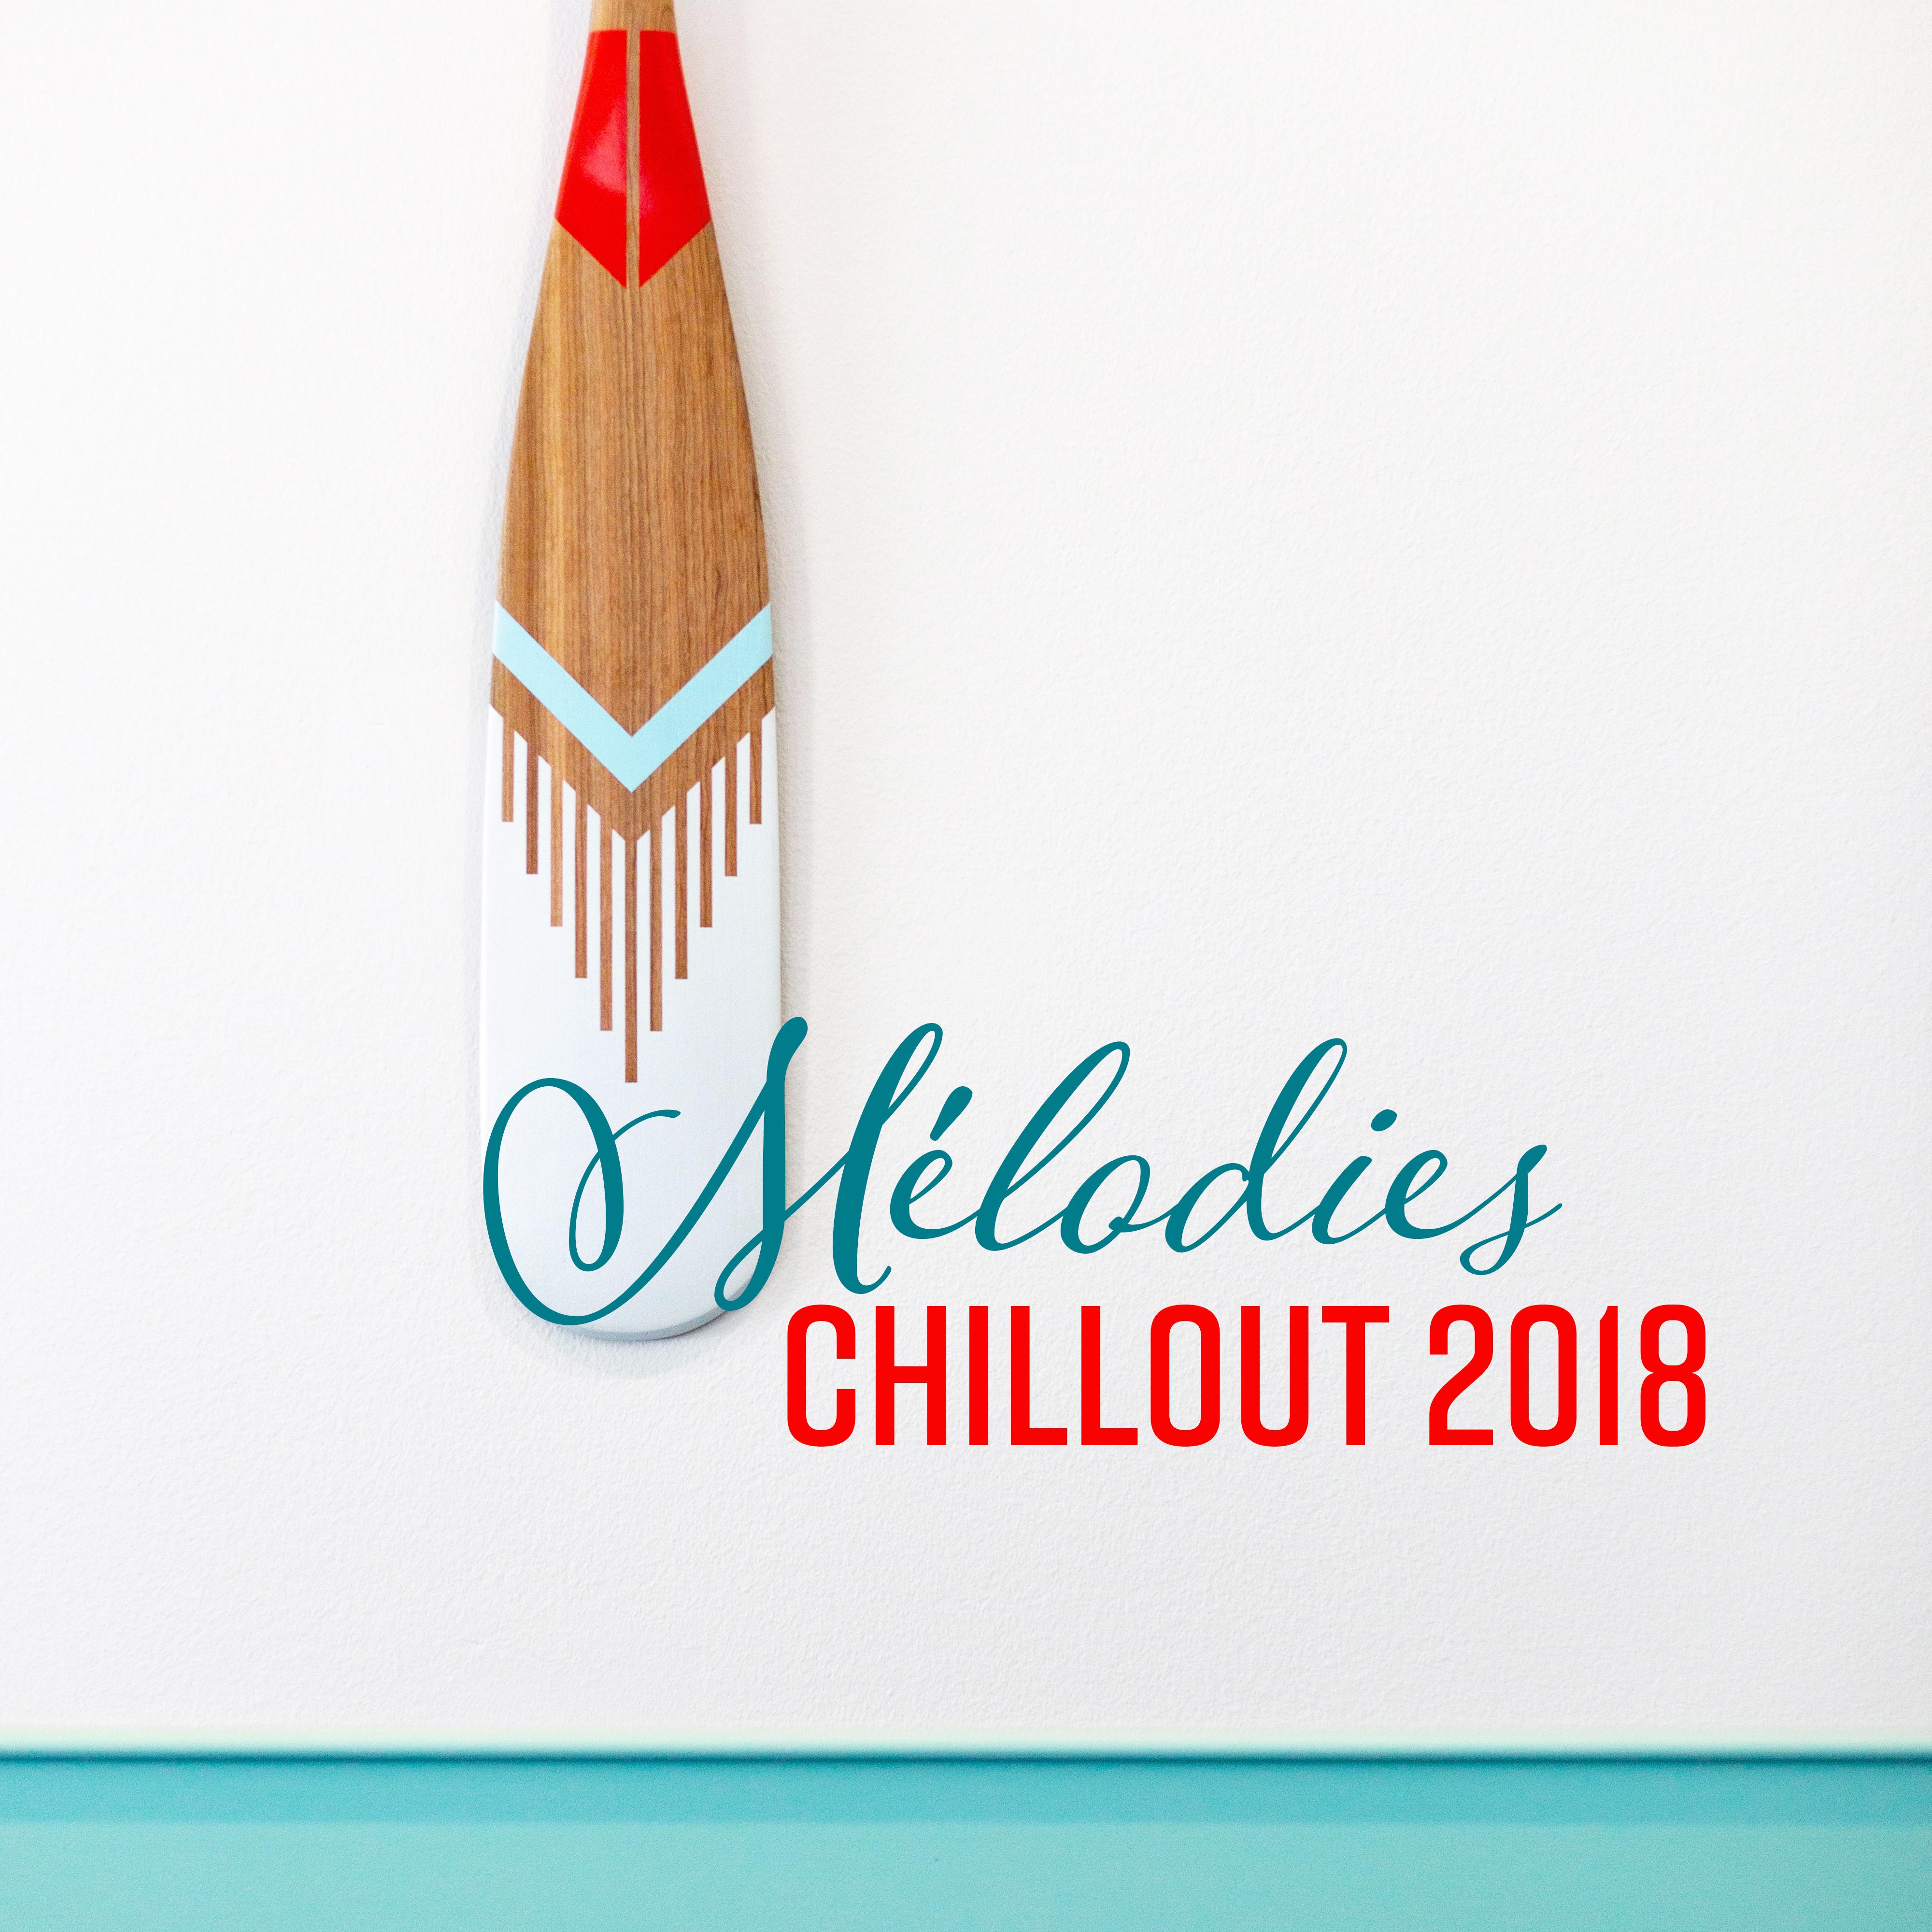 Me lodies Chillout 2018